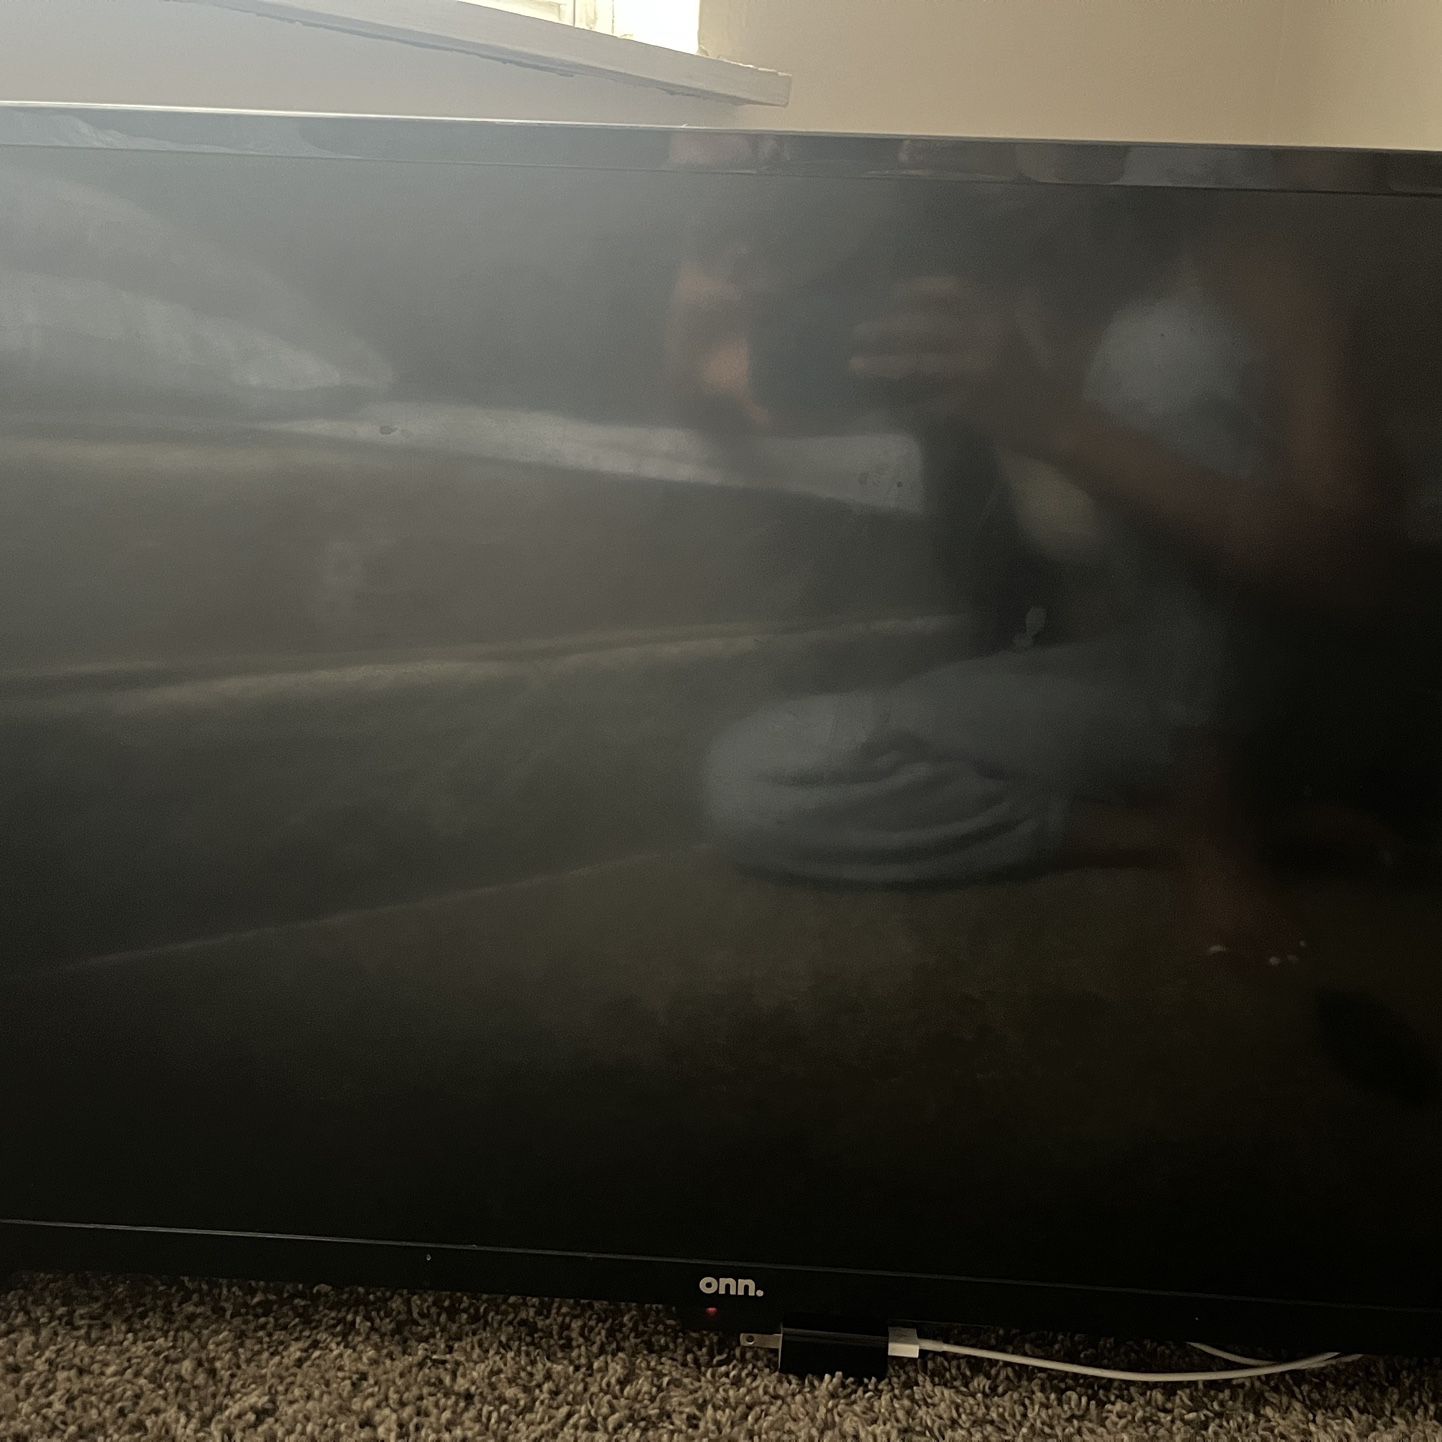 44 Inch Roku Tv With Remote